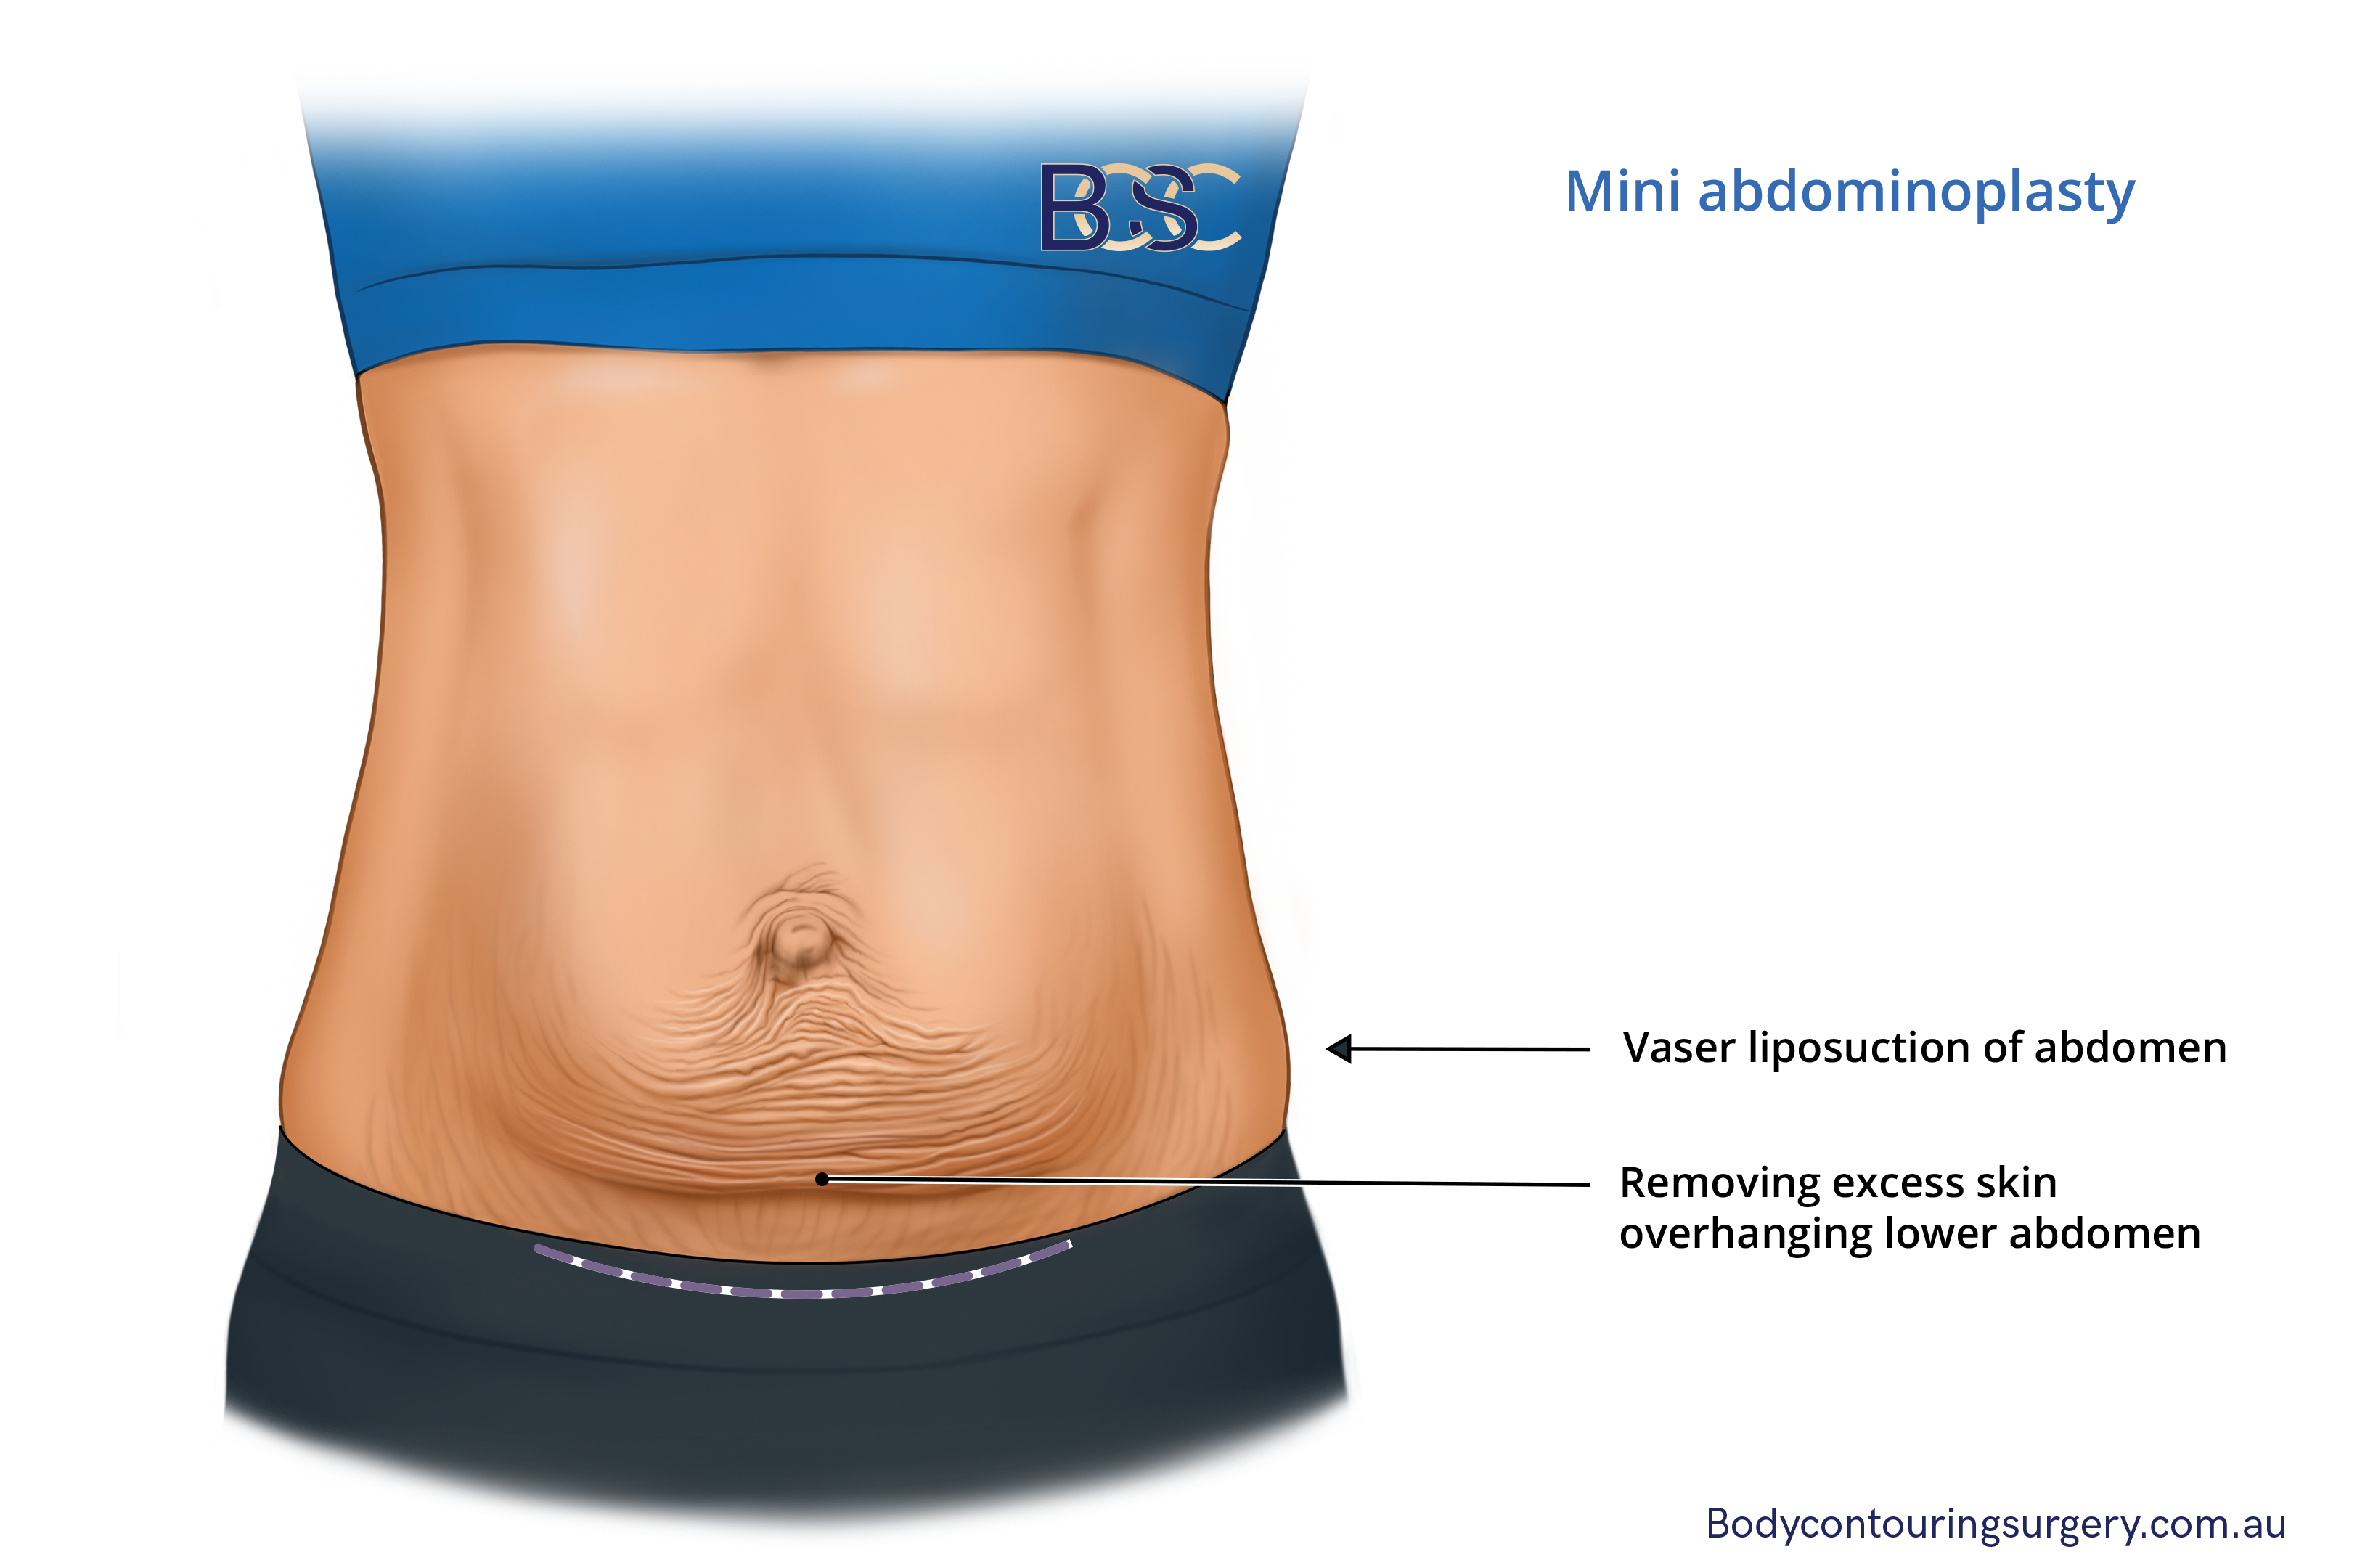 Mini tummy tuck procedure involves the removal of a minimal amount of redundant skin from the lower abdomen